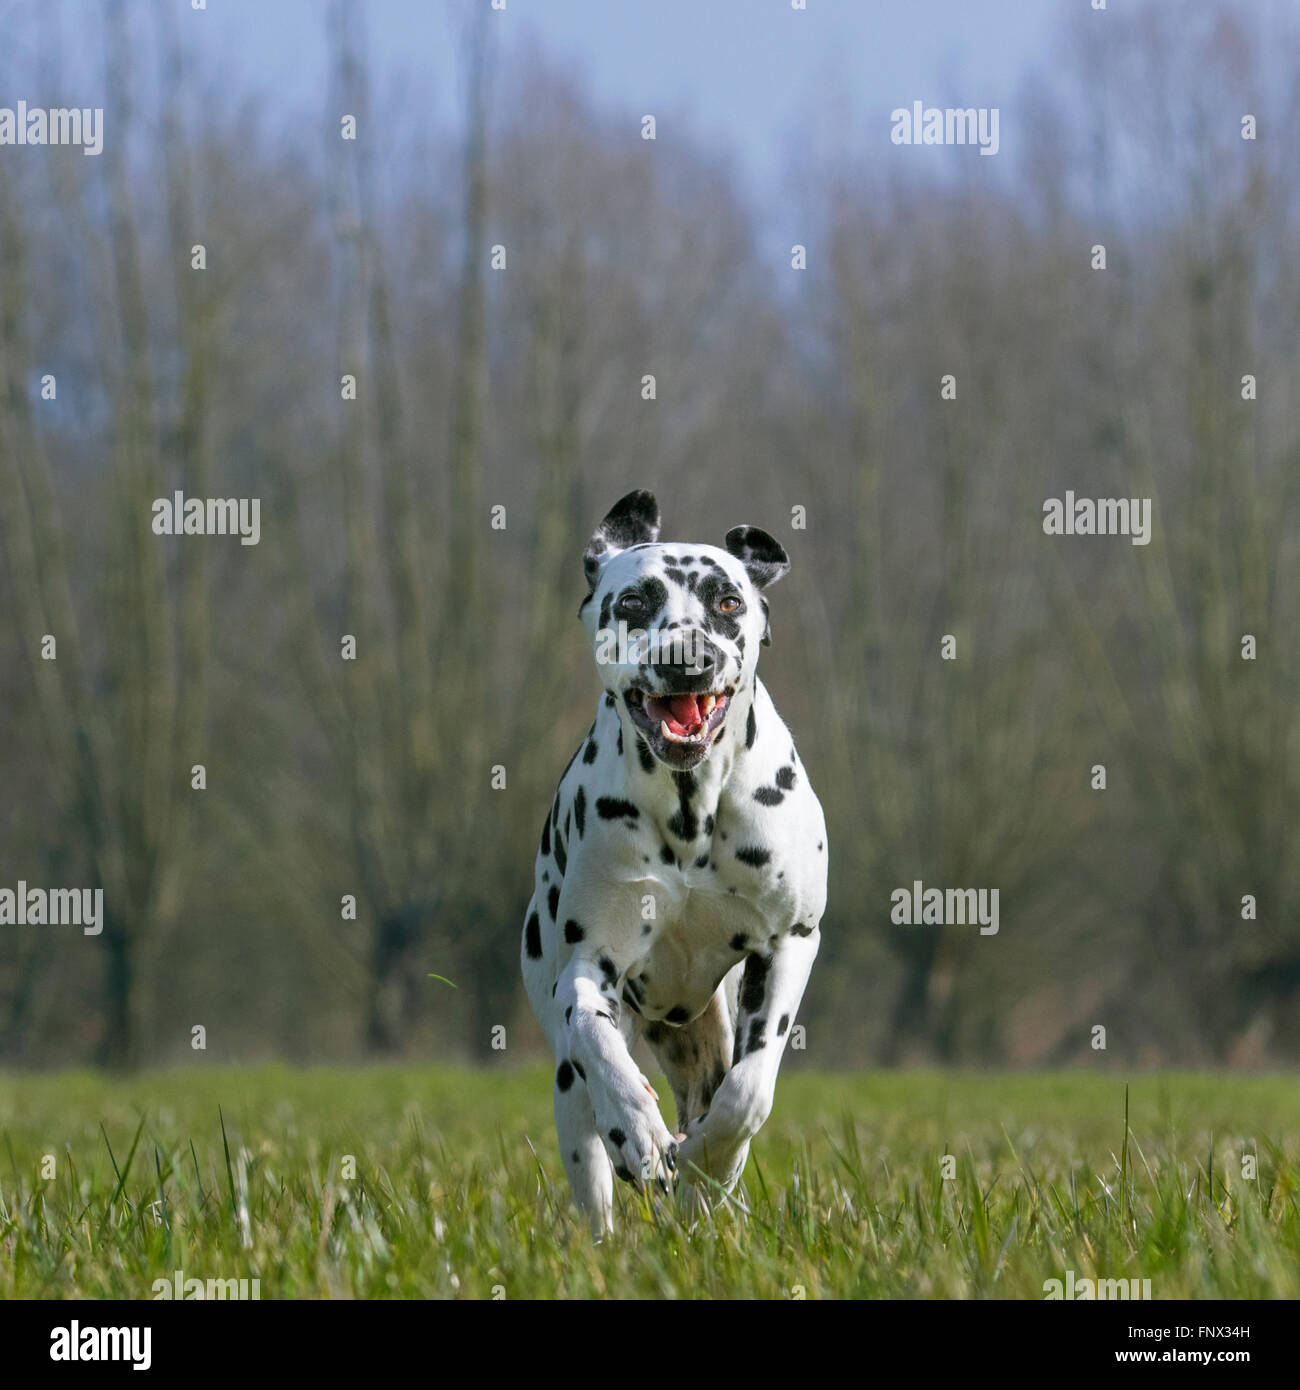 Dalmatian / carriage dog / spotted coach dog running in field Stock Photo